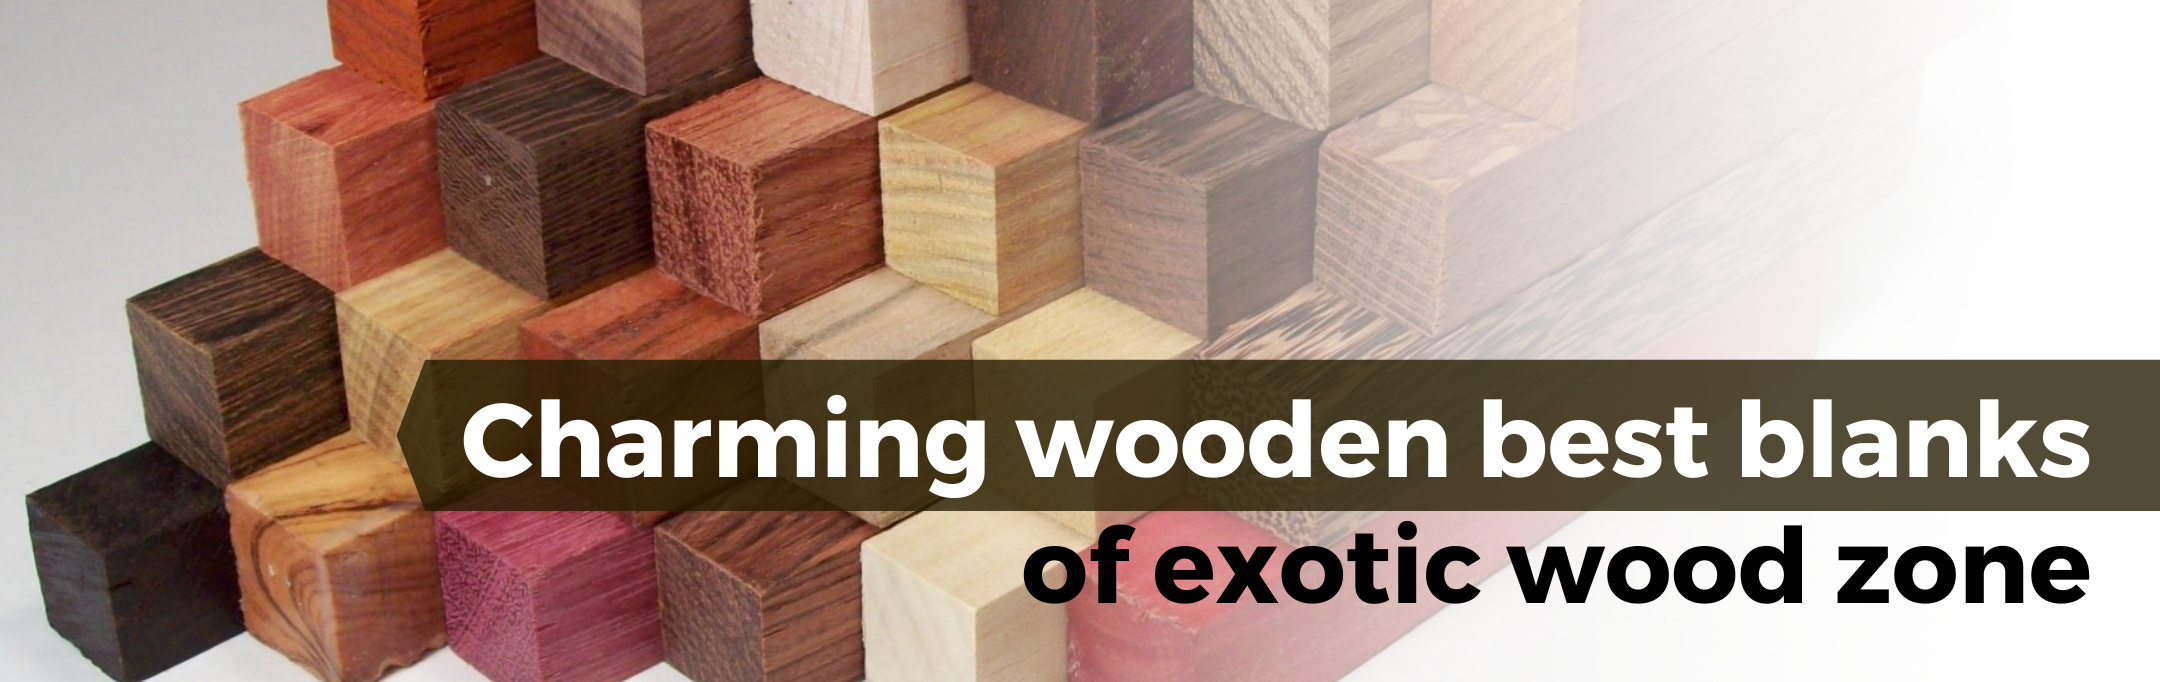 CHARMING WOODEN BEST BLANKS OF EXOTIC WOOD ZONE!